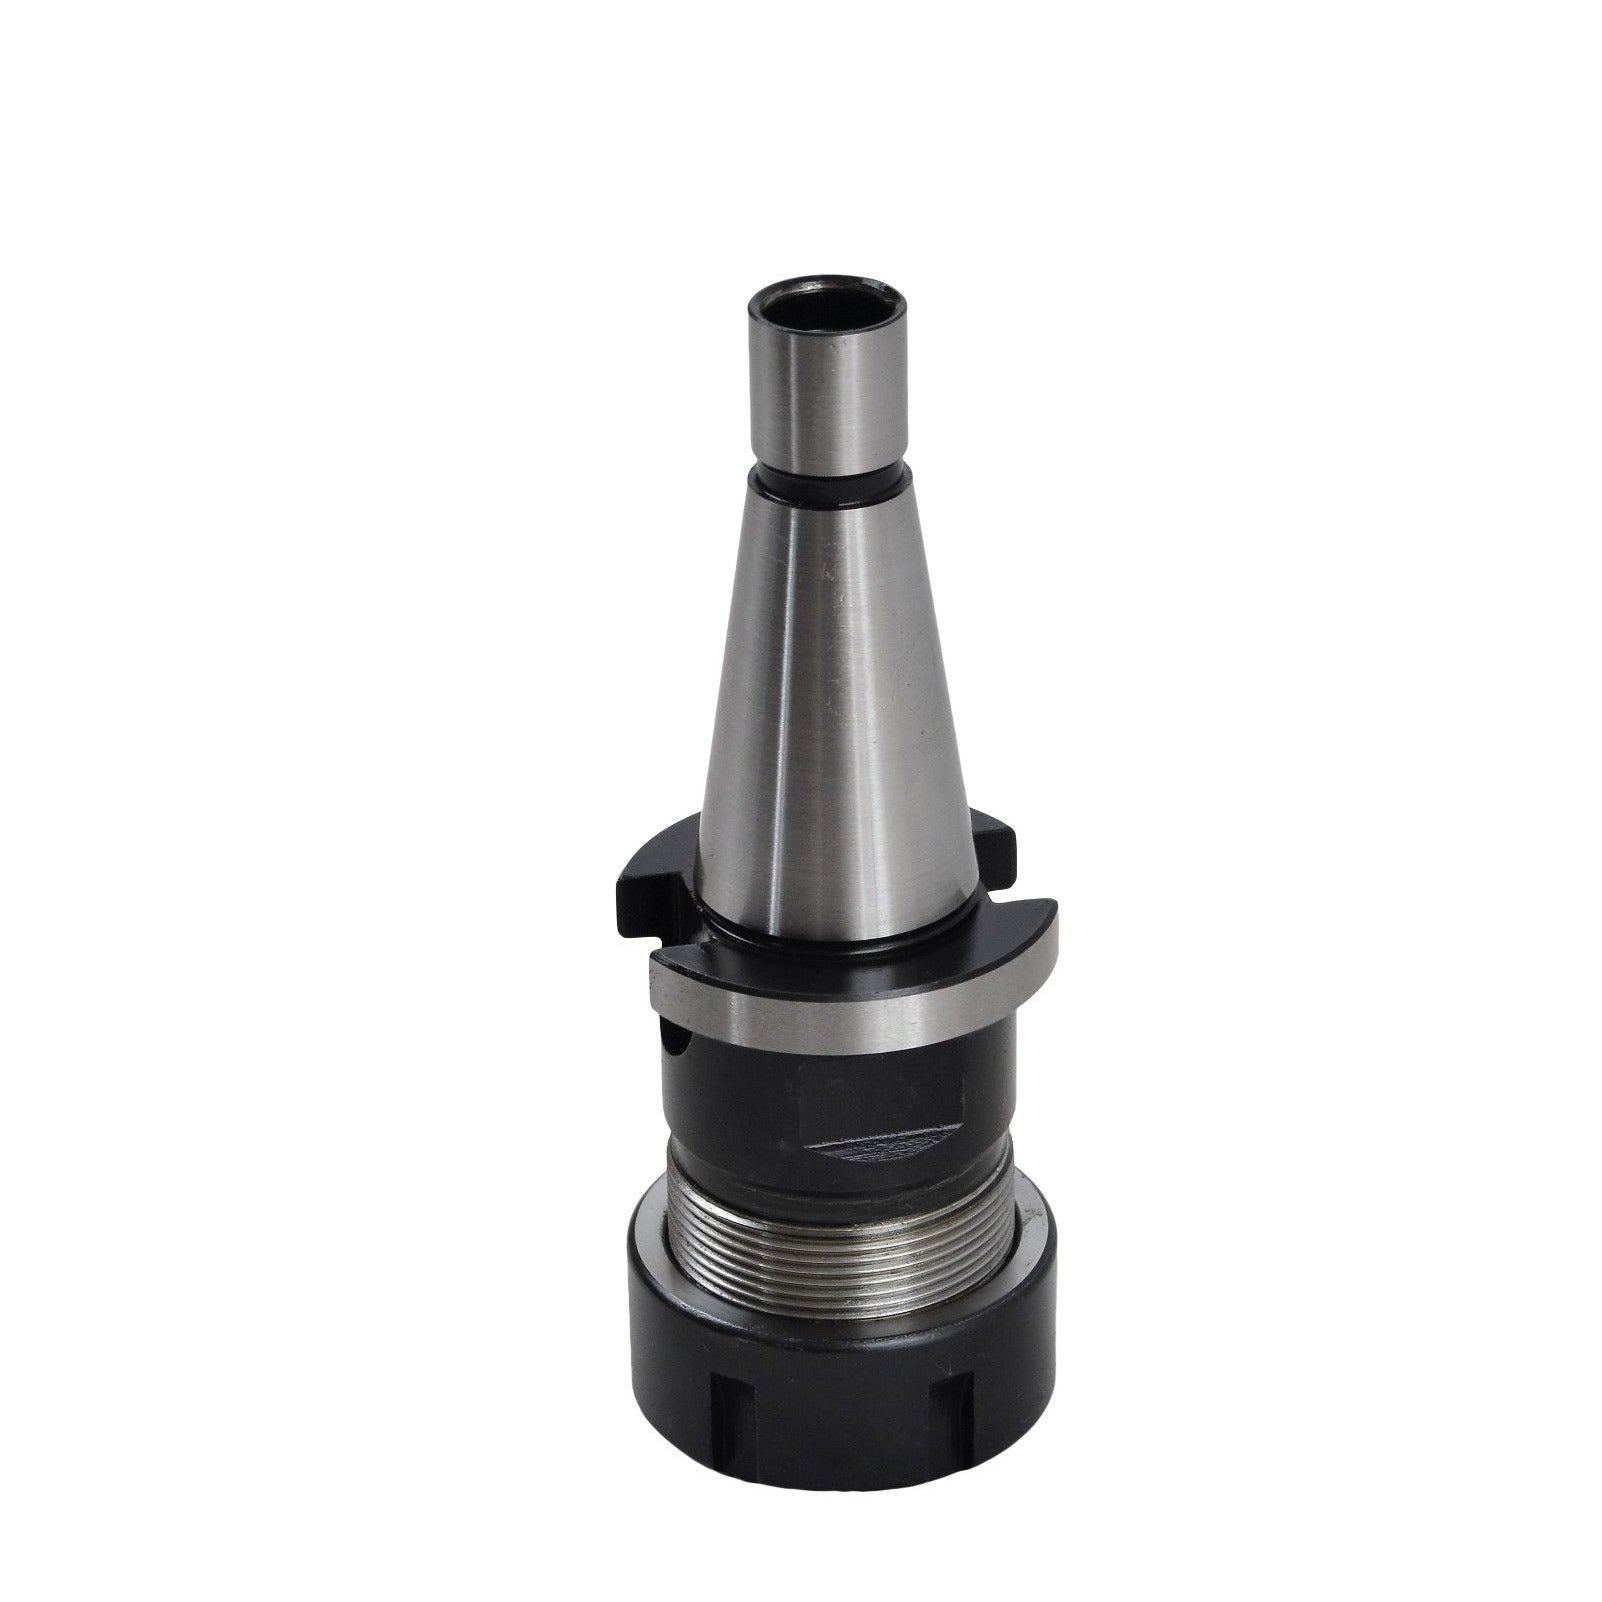 Lathe ; Milling ; NT30 - ER32 - 63 Collet Chuck Tool Holder CNC ; Router.